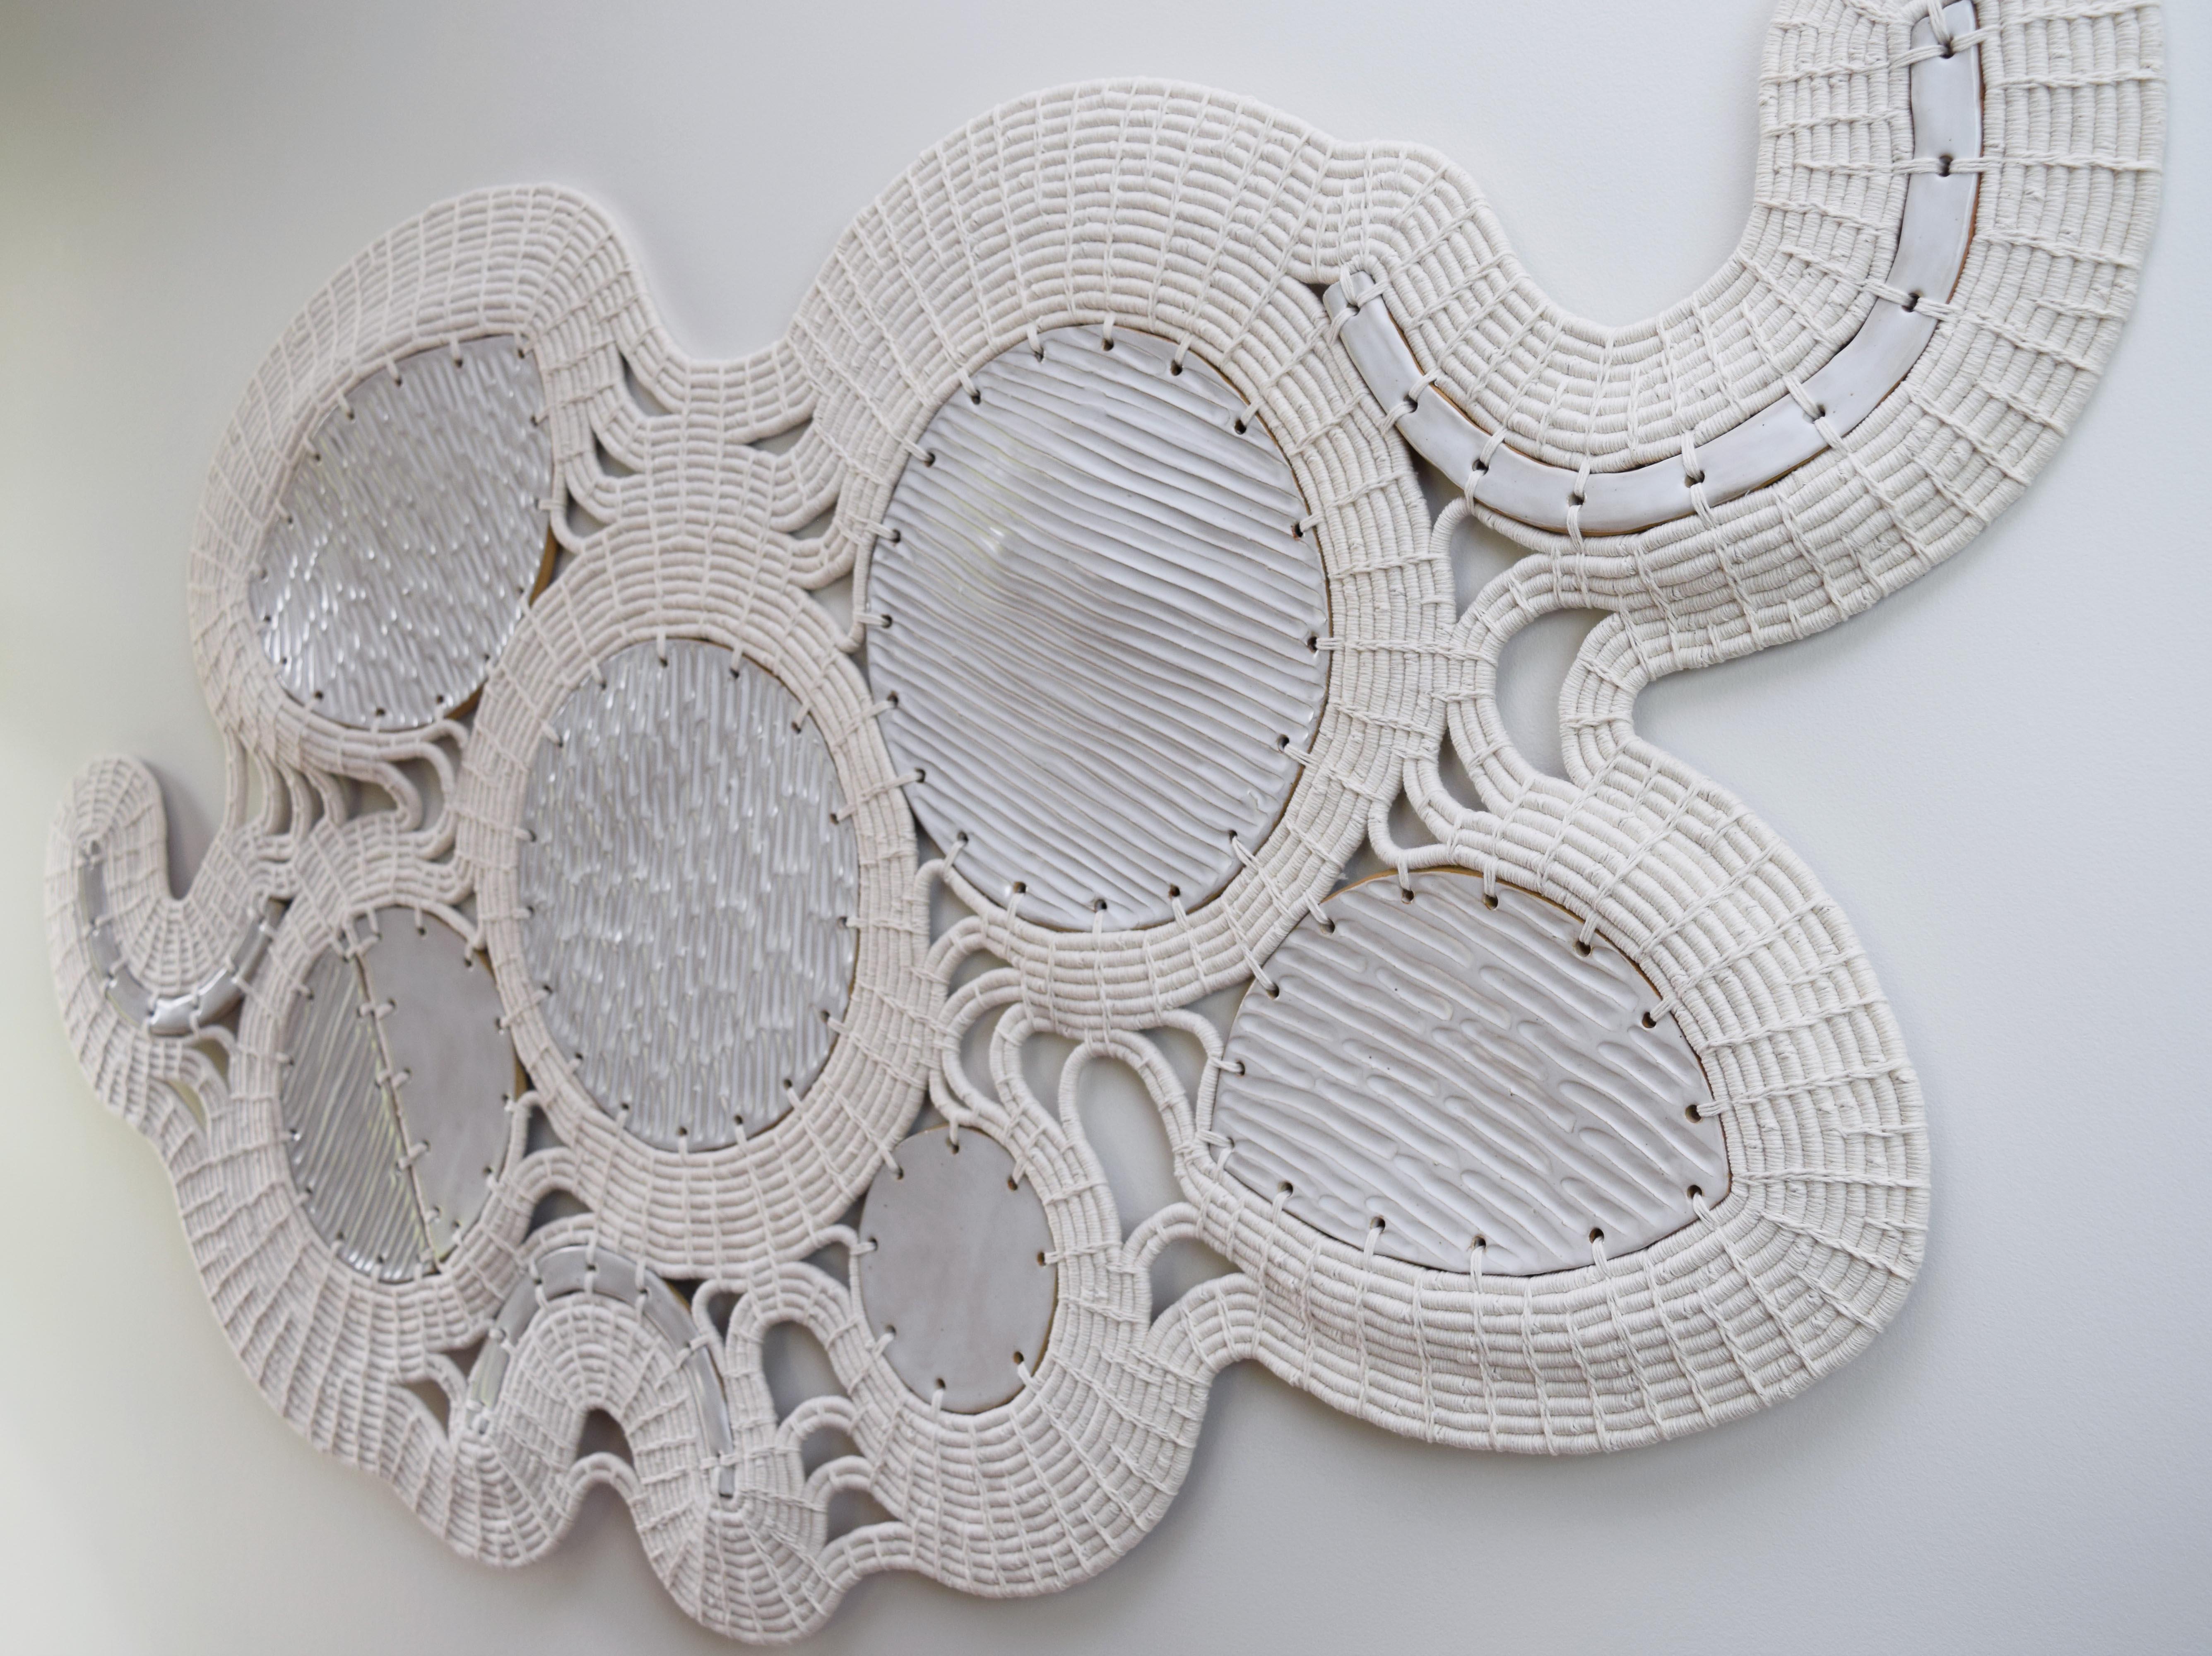 Wall sculpture #789 by Karen Gayle Tinney

One of a Kind Wall Sculpture in ceramic and cotton. Handmade ceramic shapes are finished with satin white glaze. The ceramic pieces are linked together using a coiling technique in white cotton. Wires for